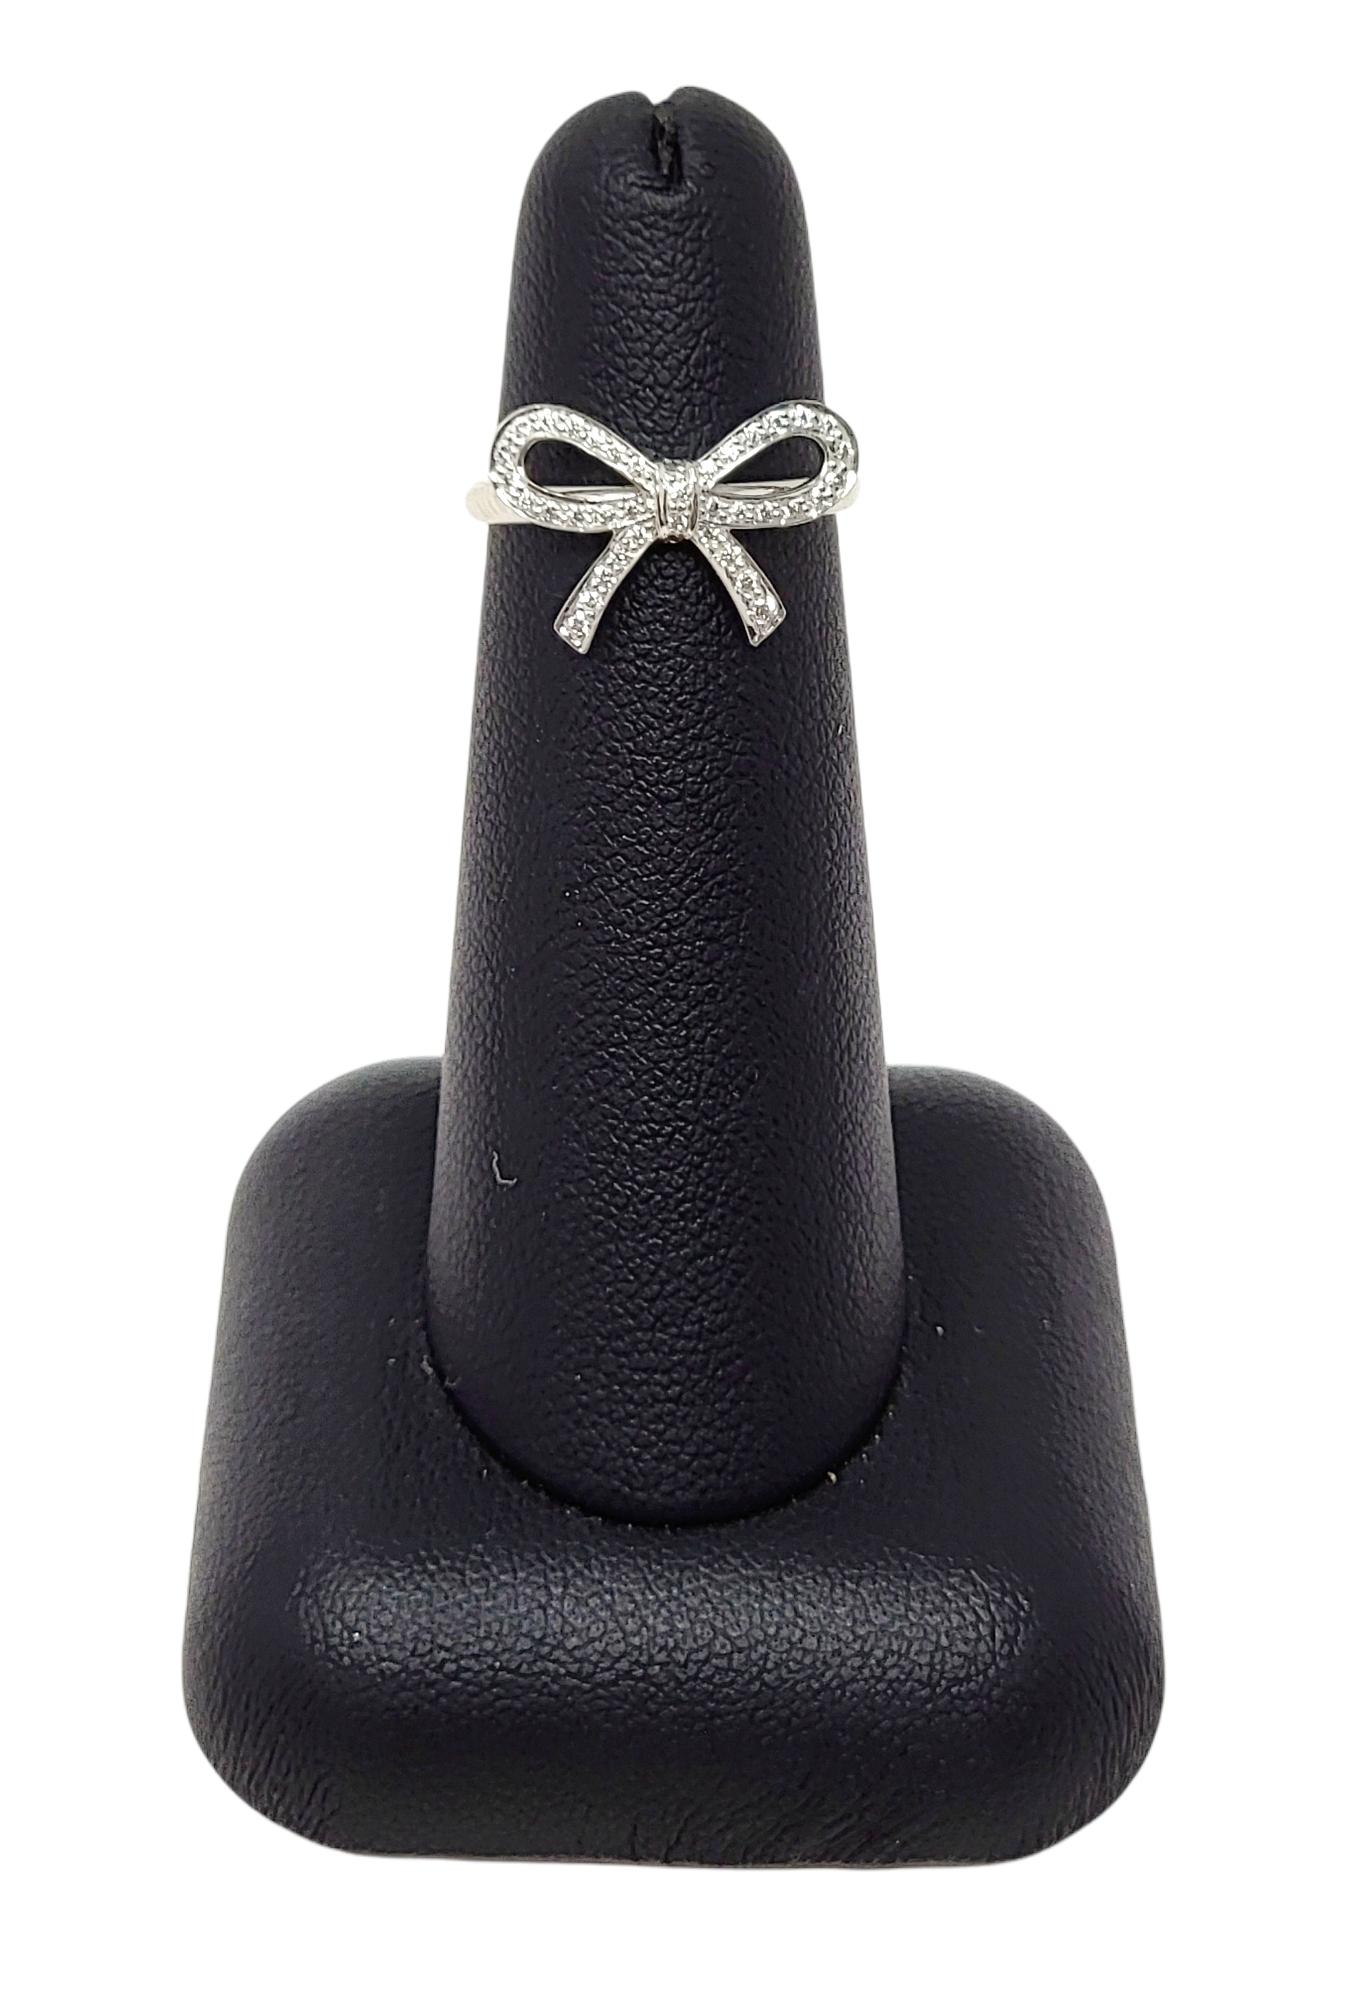 Tiffany & Co. Round Brilliant Pave Diamond Bow Band Ring in Platinum For Sale 4